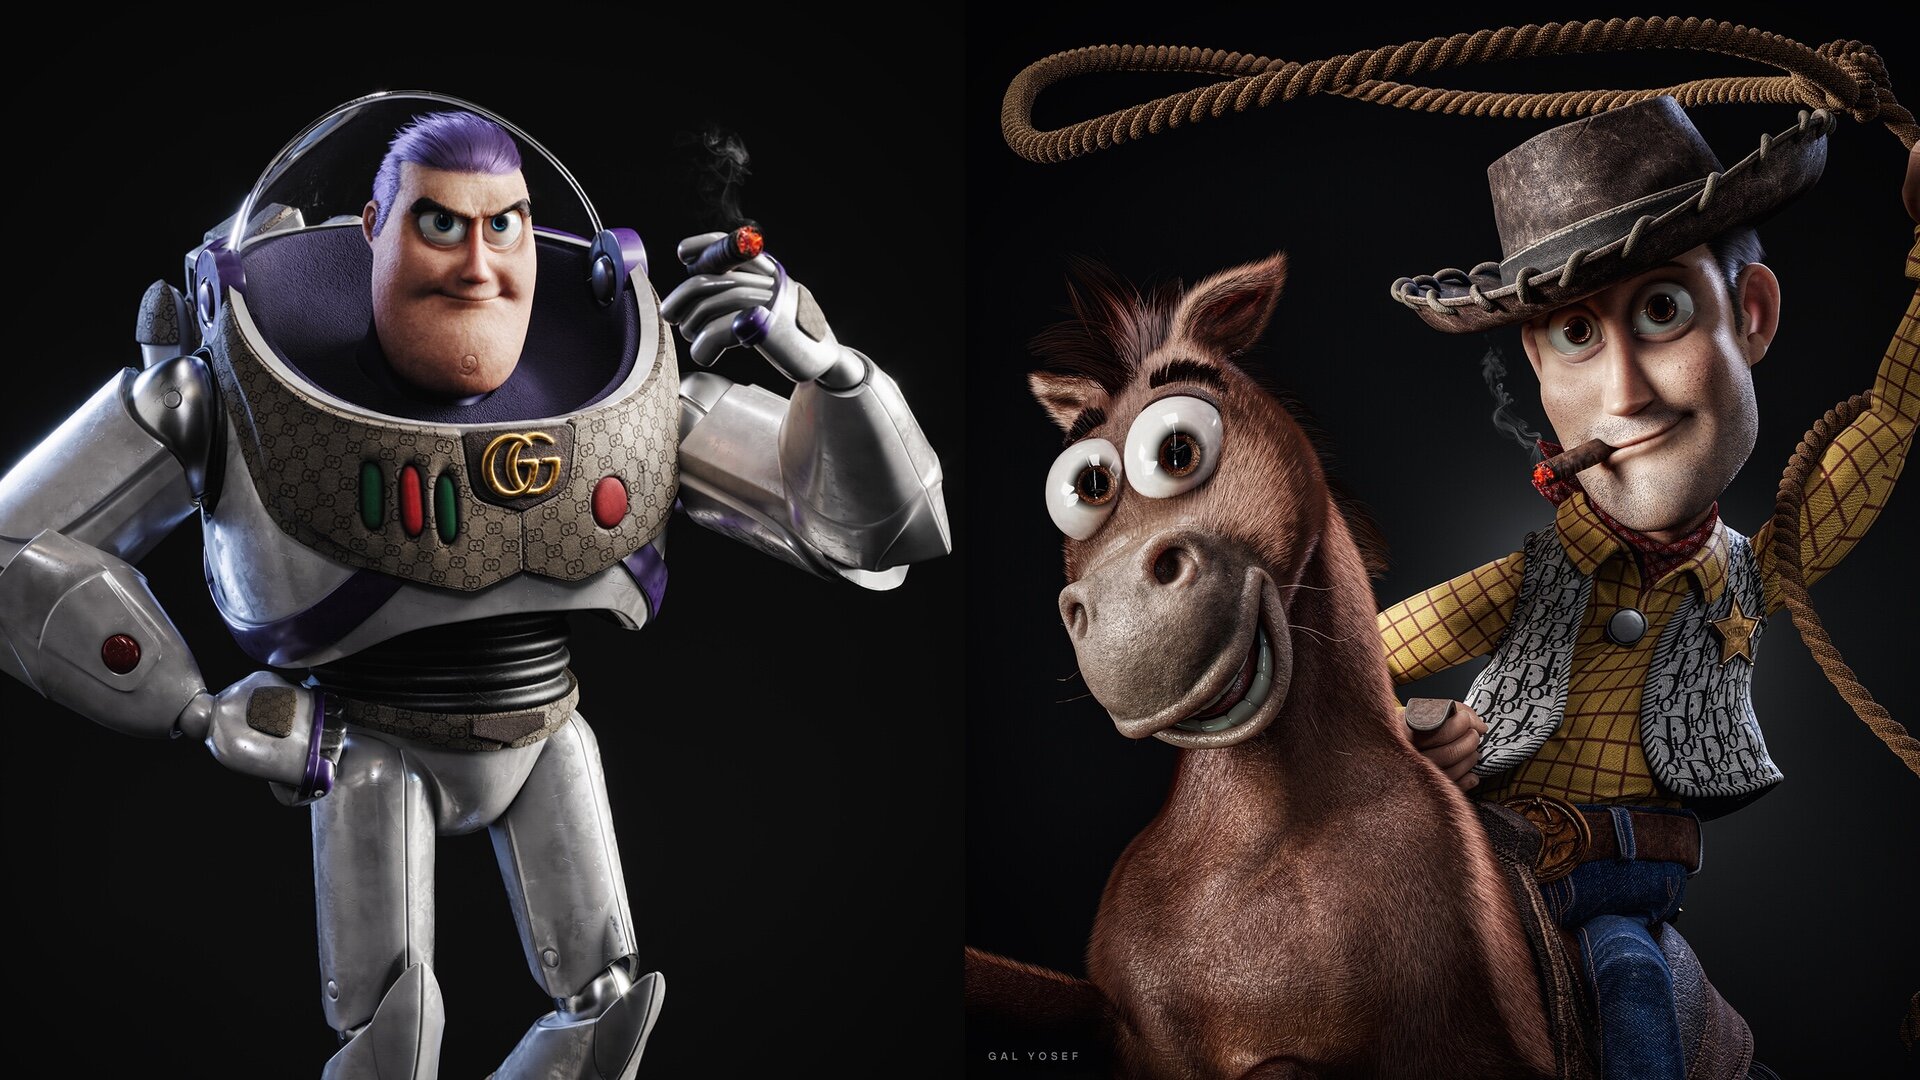 TOY STORY Fan Art Gives Woody and Buzz a More Rugged Look — GeekTyrant